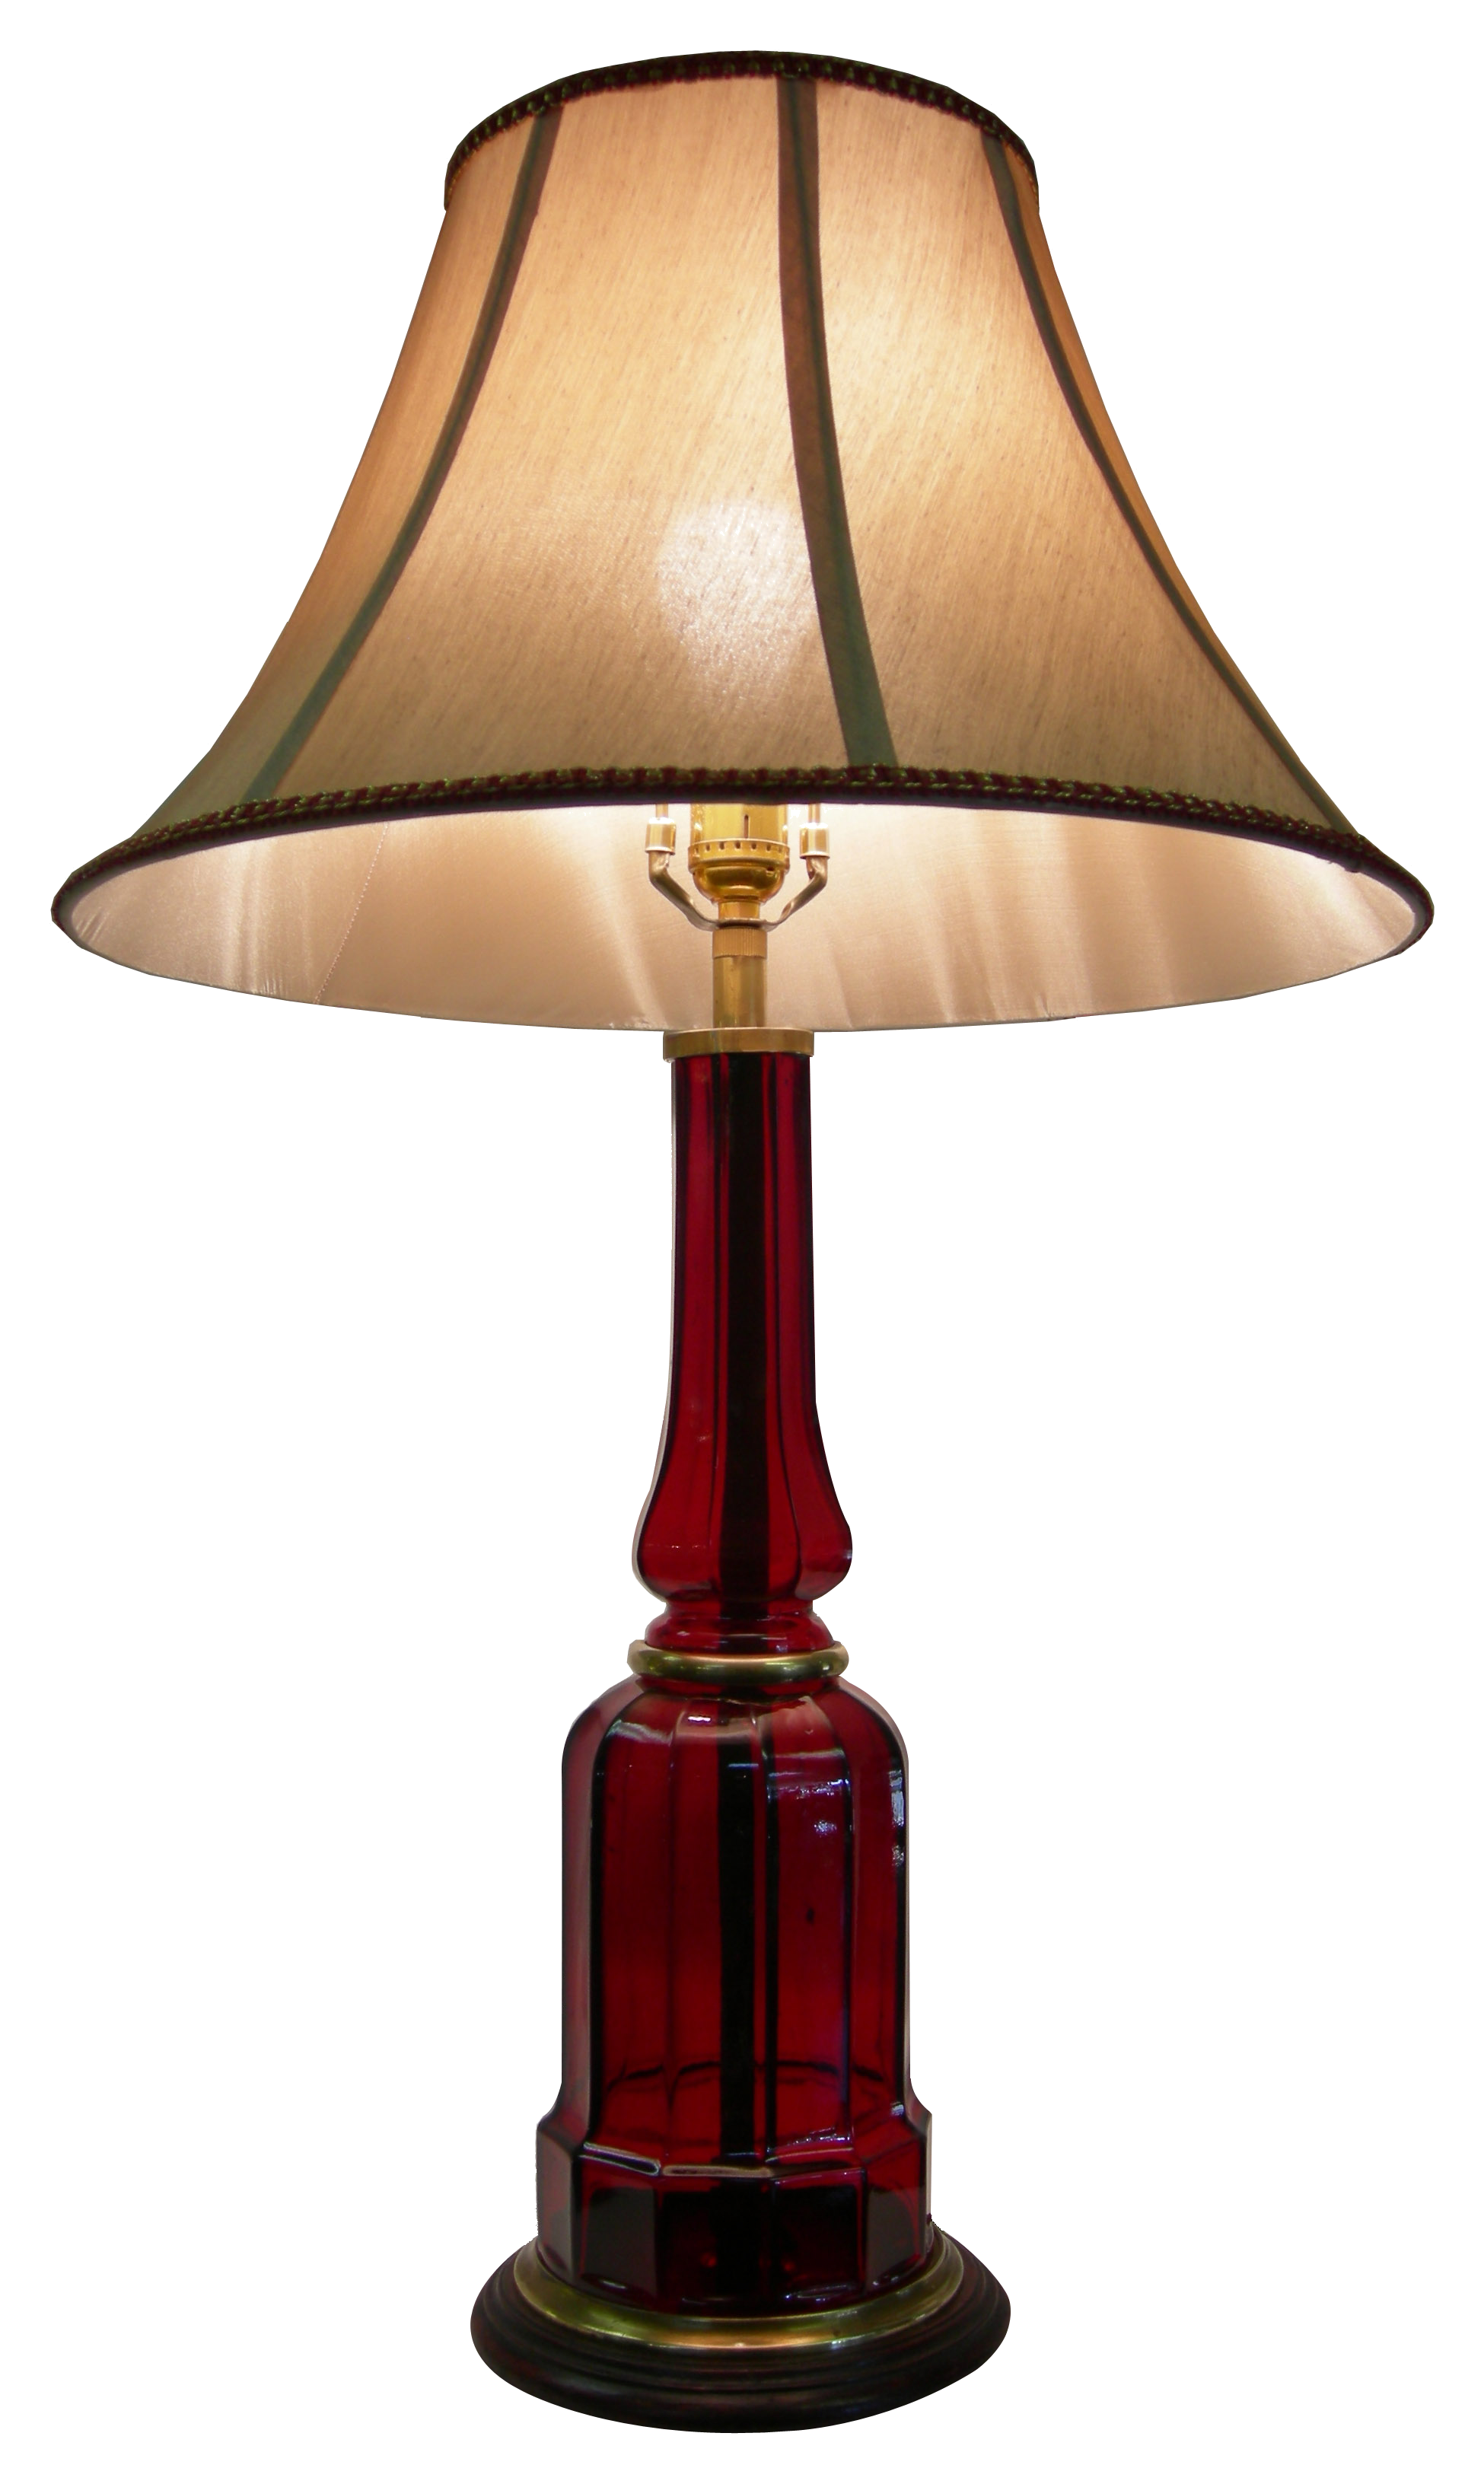 Hanging Lamp Png by Moonglowl